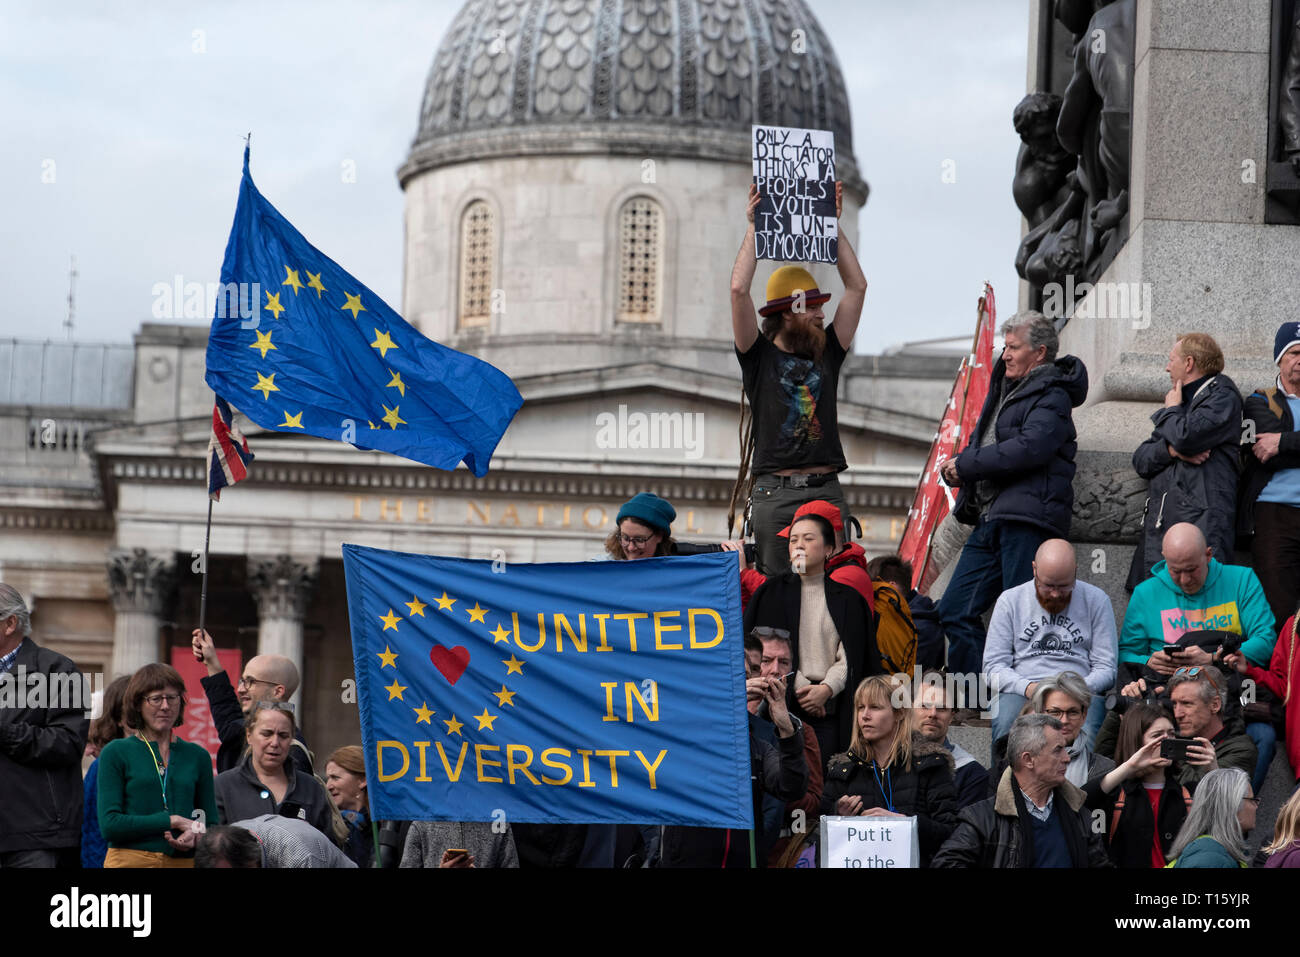 London, UK. 23rd Mar, 2019. Peoples Vote March, Nelsons Column, crown EU flag. Crowd detail and banners as taken from the perspective of a protester. Remain banners, second referendum. Credit: Tony Pincham/Alamy Live News Stock Photo